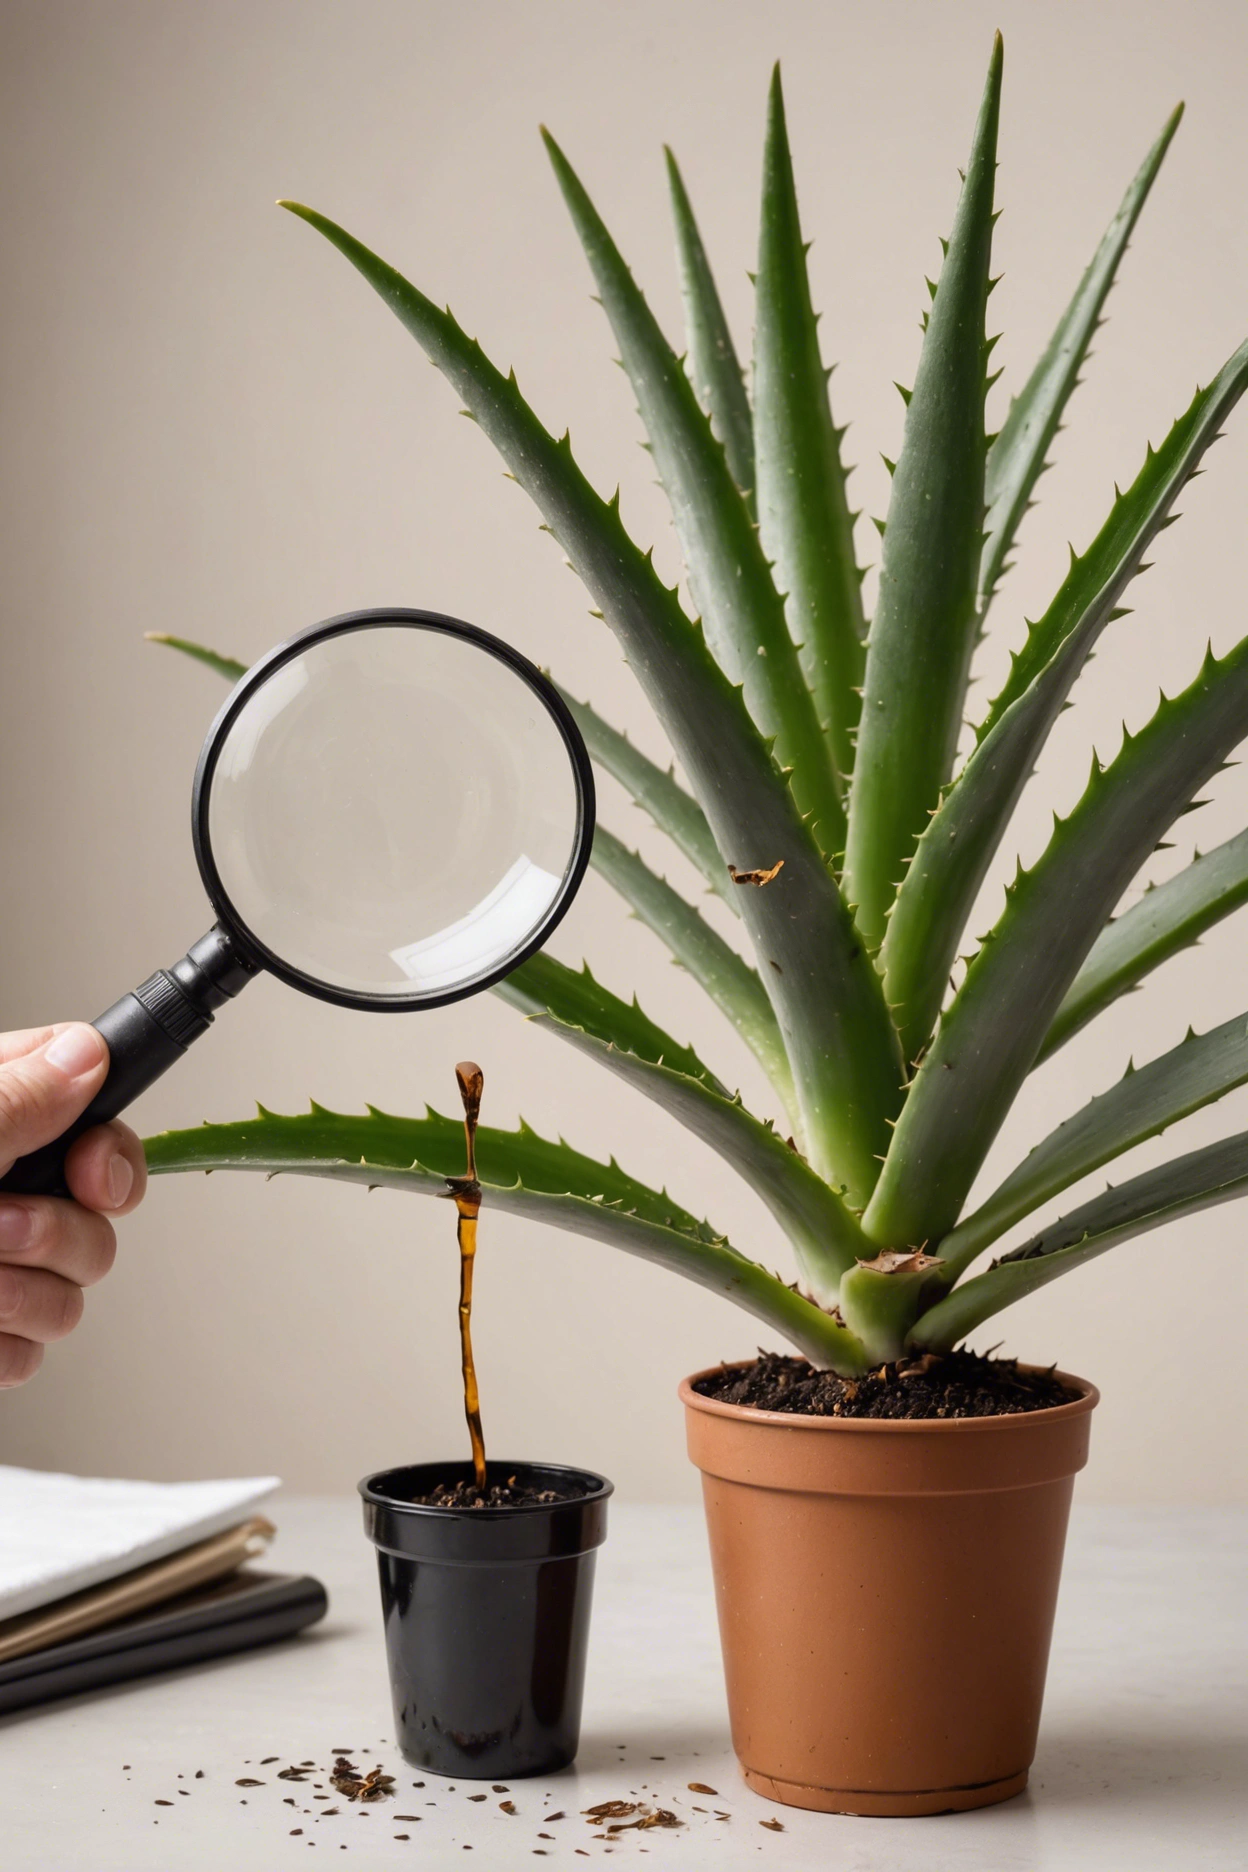 "Close-up of a wilting aloe vera plant with brown leaves, being inspected with a magnifying glass and surrounded by soil testing tools and nutrient solution."